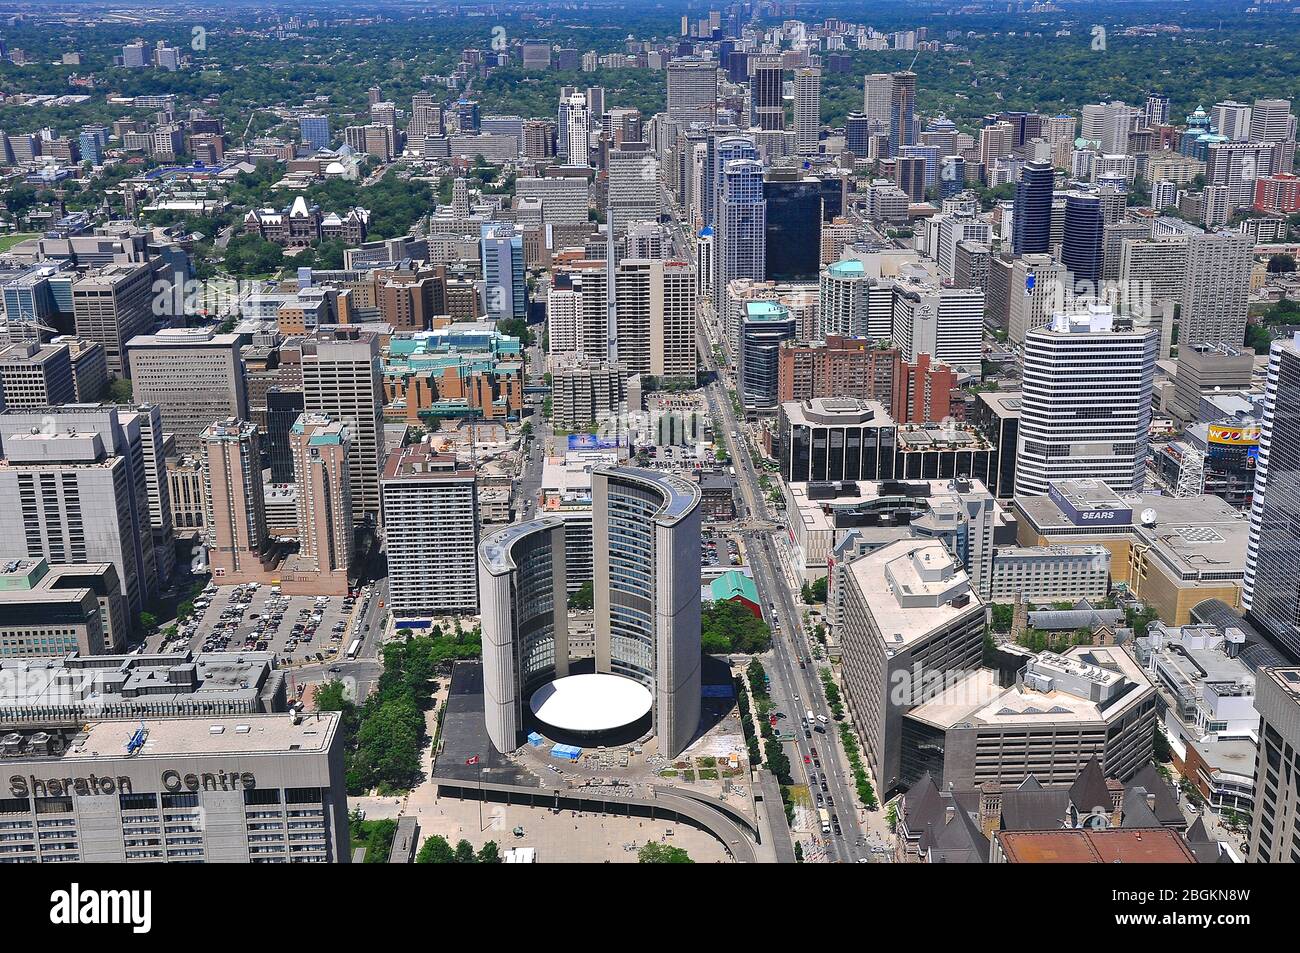 Aerial view over the city center of Toronto, Ontario, Canada.  Bird's-eye view of Toronto from Lake Ontario looking north. Stock Photo